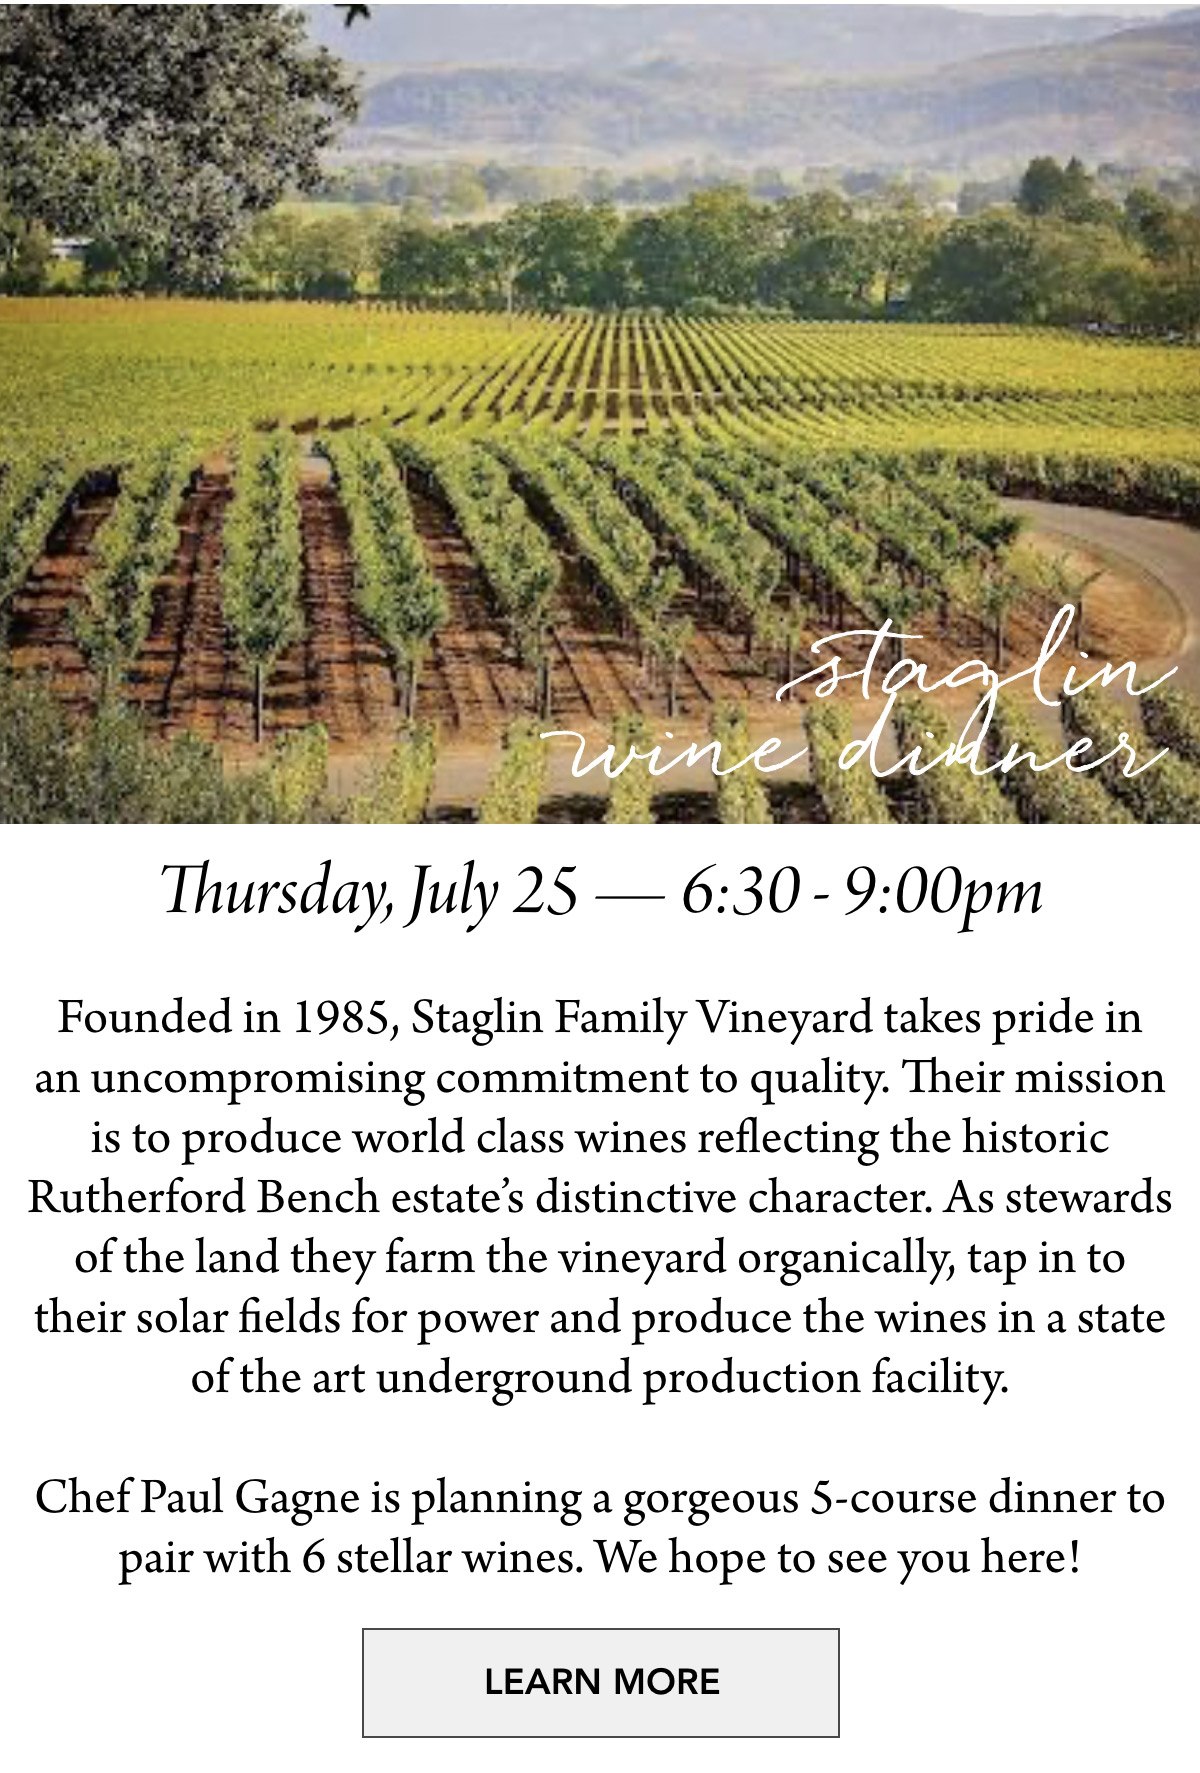  staglin wine dinner Thursday, July 25 — 6:30 - 9:00pm Founded in 1985, Staglin Family Vineyard takes pride in an uncompromising commitment to quality. Their mission is to produce world class wines reflecting the historic Rutherford Bench estate’s distinctive character. As stewards of the land they farm the vineyard organically, tap in to their solar fields for power and produce the wines in a state of the art underground production facility. Chef Paul Gagne is planning a gorgeous 5-course dinner to pair with 6 stellar wines. We hope to see you here! LEARN MORE